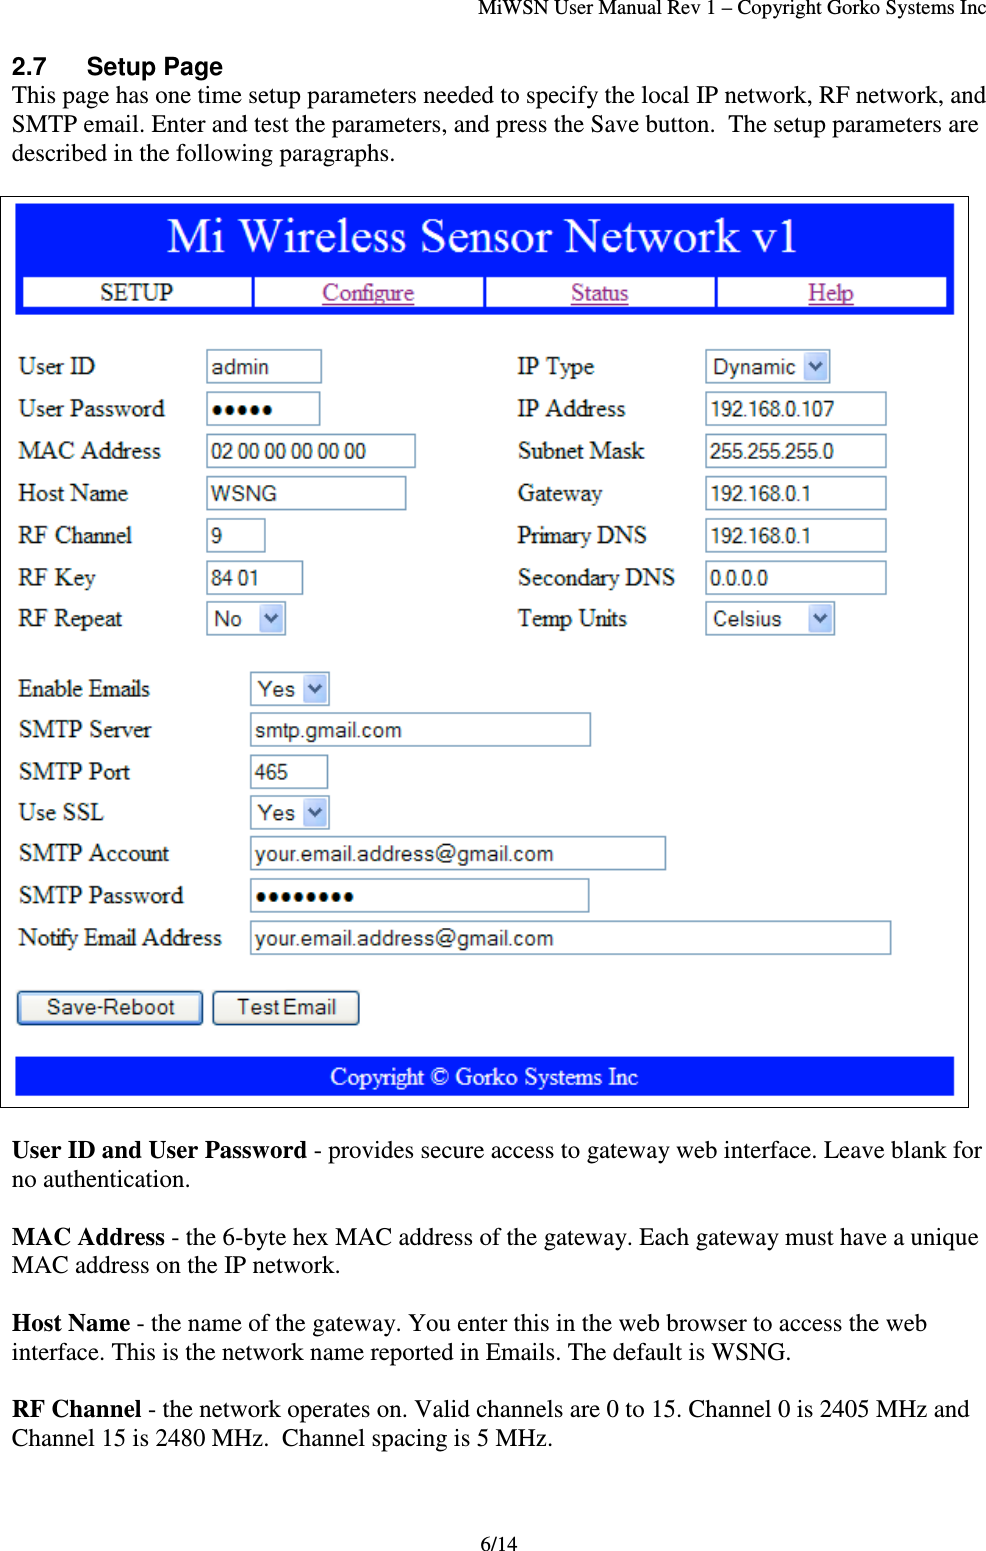 MiWSN User Manual Rev 1 – Copyright Gorko Systems Inc6/142.7 Setup PageThis page has one time setup parameters needed to specify the local IP network, RF network, andSMTP email. Enter and test the parameters, and press the Save button.  The setup parameters aredescribed in the following paragraphs.User ID and User Password - provides secure access to gateway web interface. Leave blank forno authentication.MAC Address - the 6-byte hex MAC address of the gateway. Each gateway must have a uniqueMAC address on the IP network.Host Name - the name of the gateway. You enter this in the web browser to access the webinterface. This is the network name reported in Emails. The default is WSNG.RF Channel - the network operates on. Valid channels are 0 to 15. Channel 0 is 2405 MHz andChannel 15 is 2480 MHz.  Channel spacing is 5 MHz.